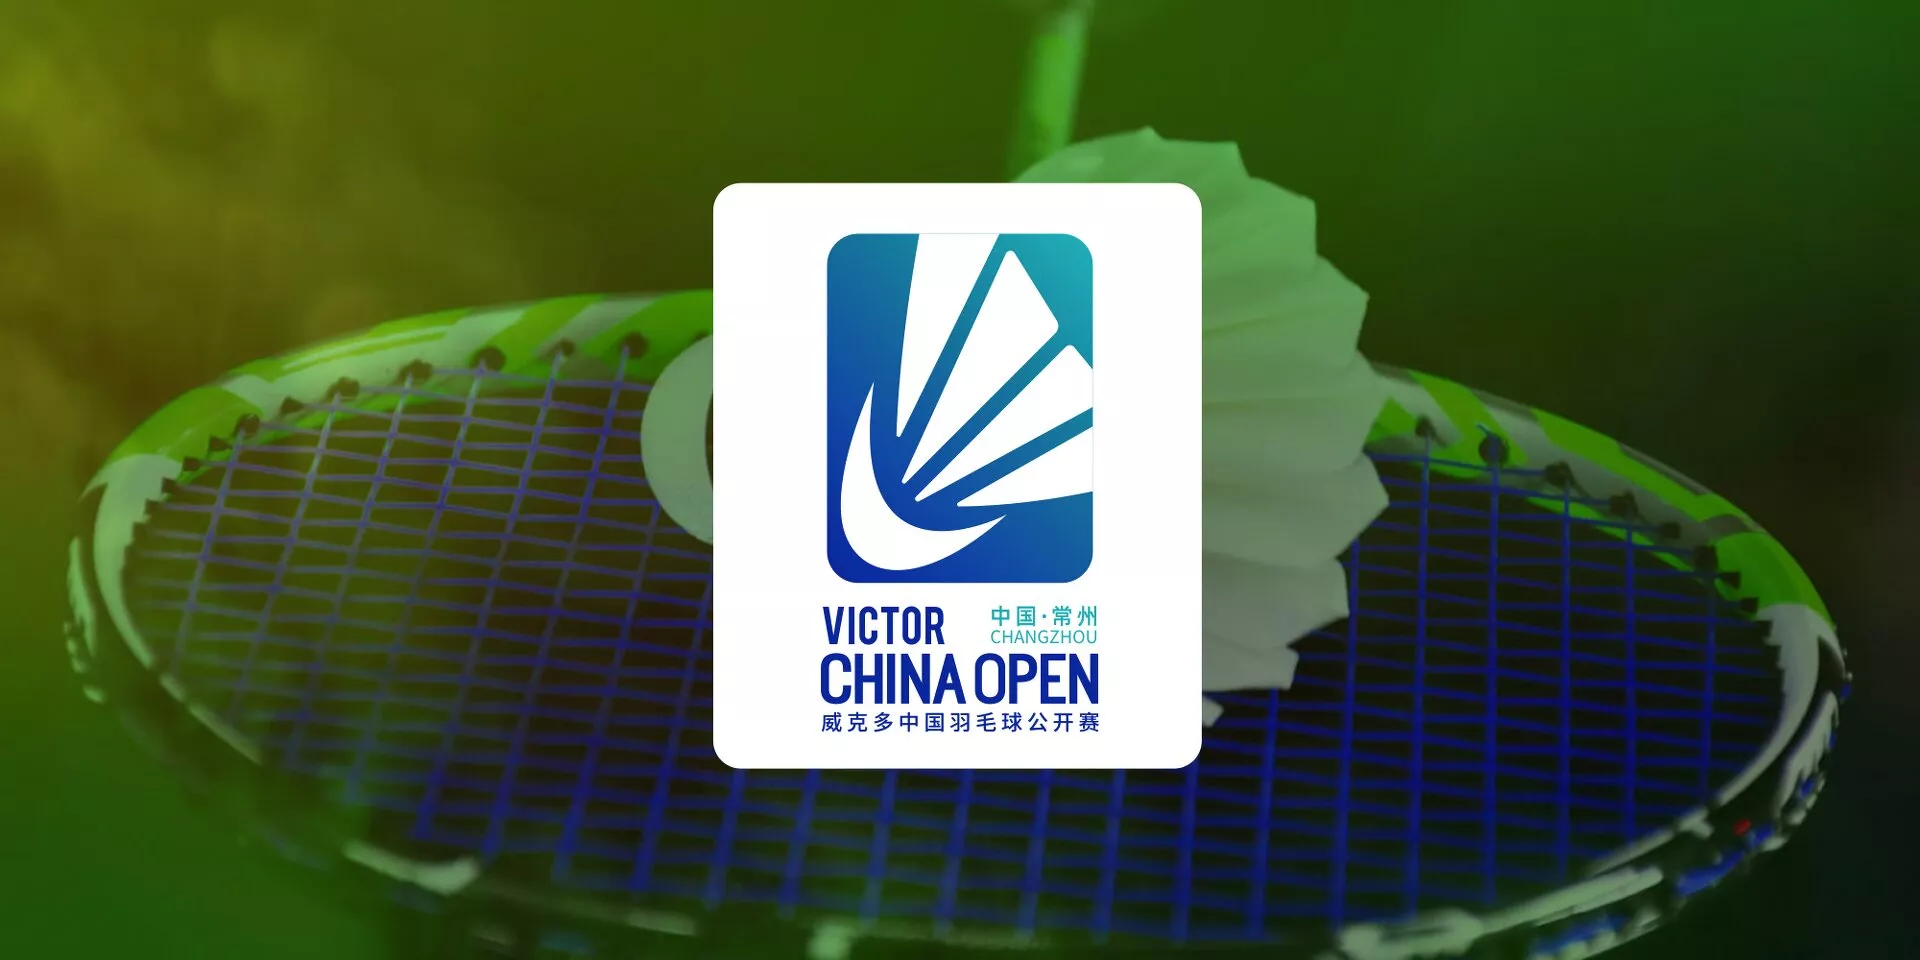 Where and how to watch BWF China Open 2023 live in India?